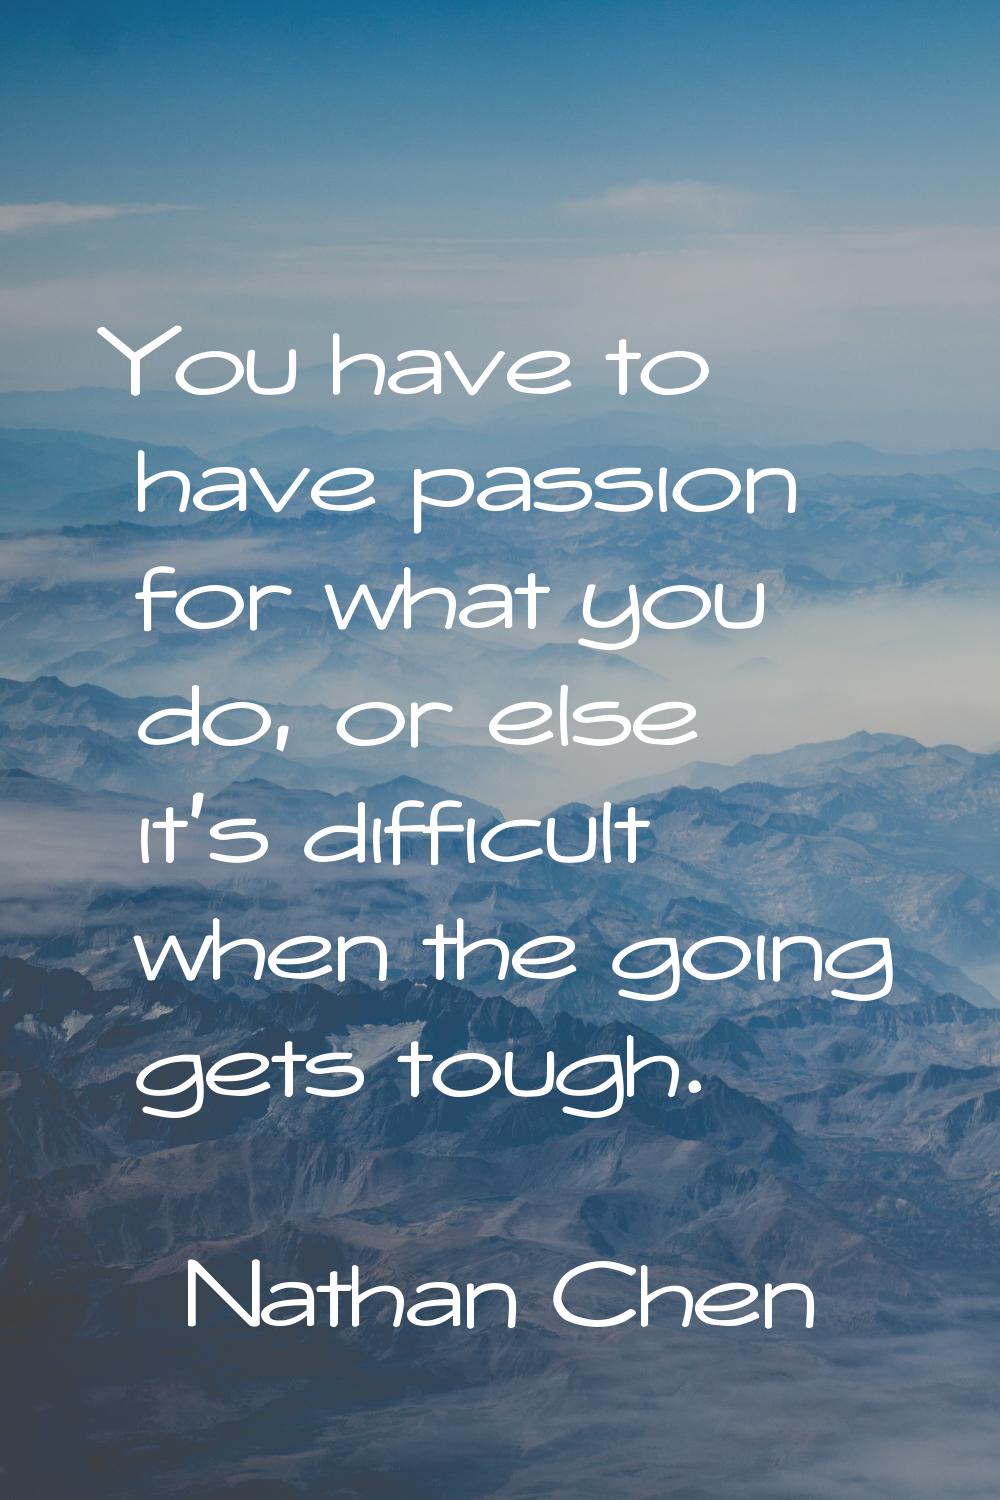 You have to have passion for what you do, or else it's difficult when the going gets tough.